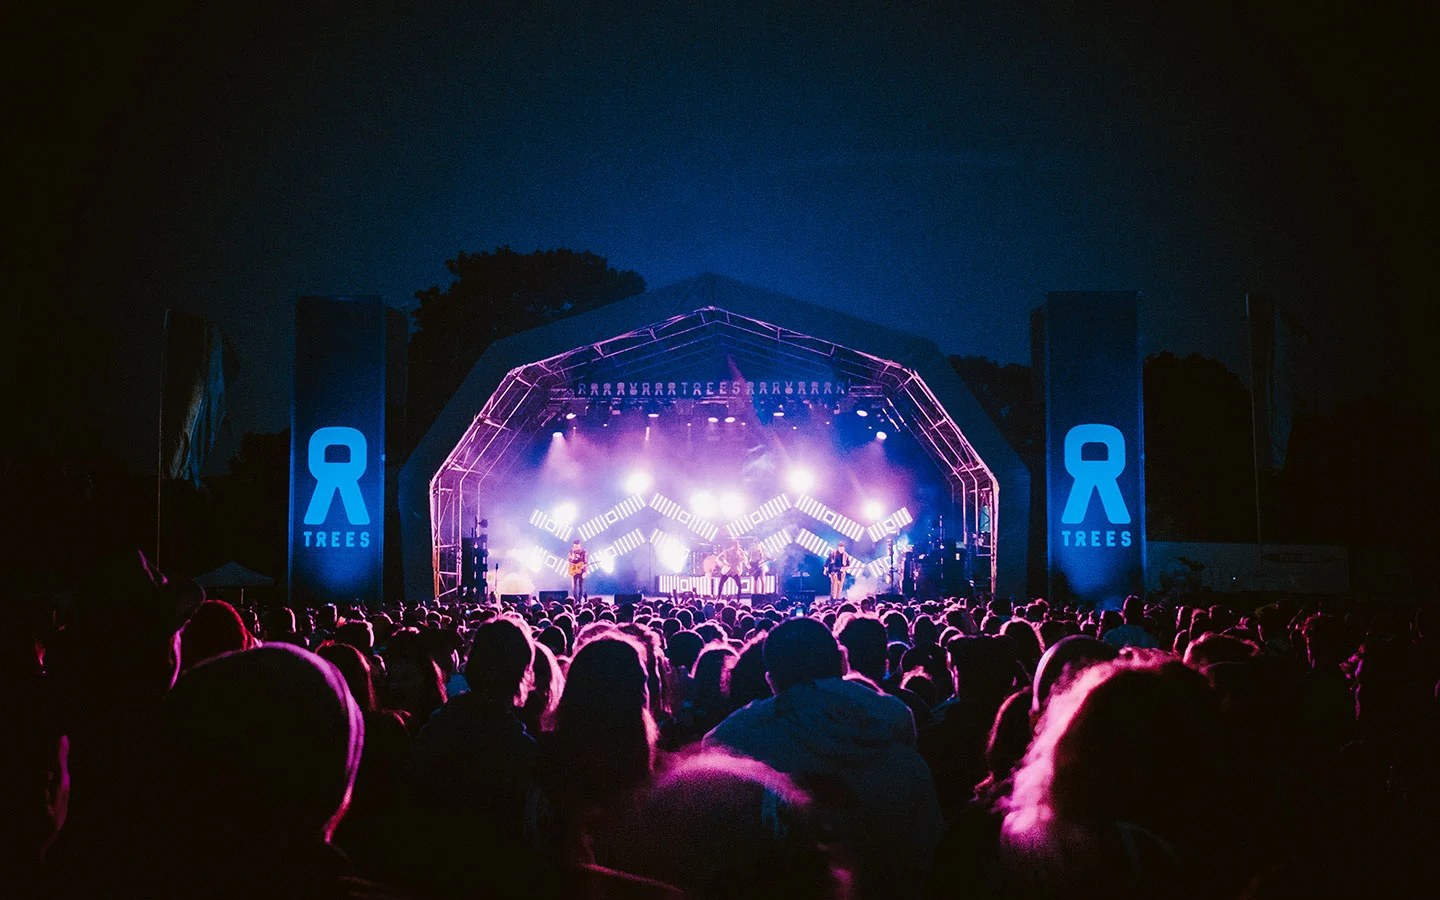 Crowds at the main stage at the 2000 Trees music festival